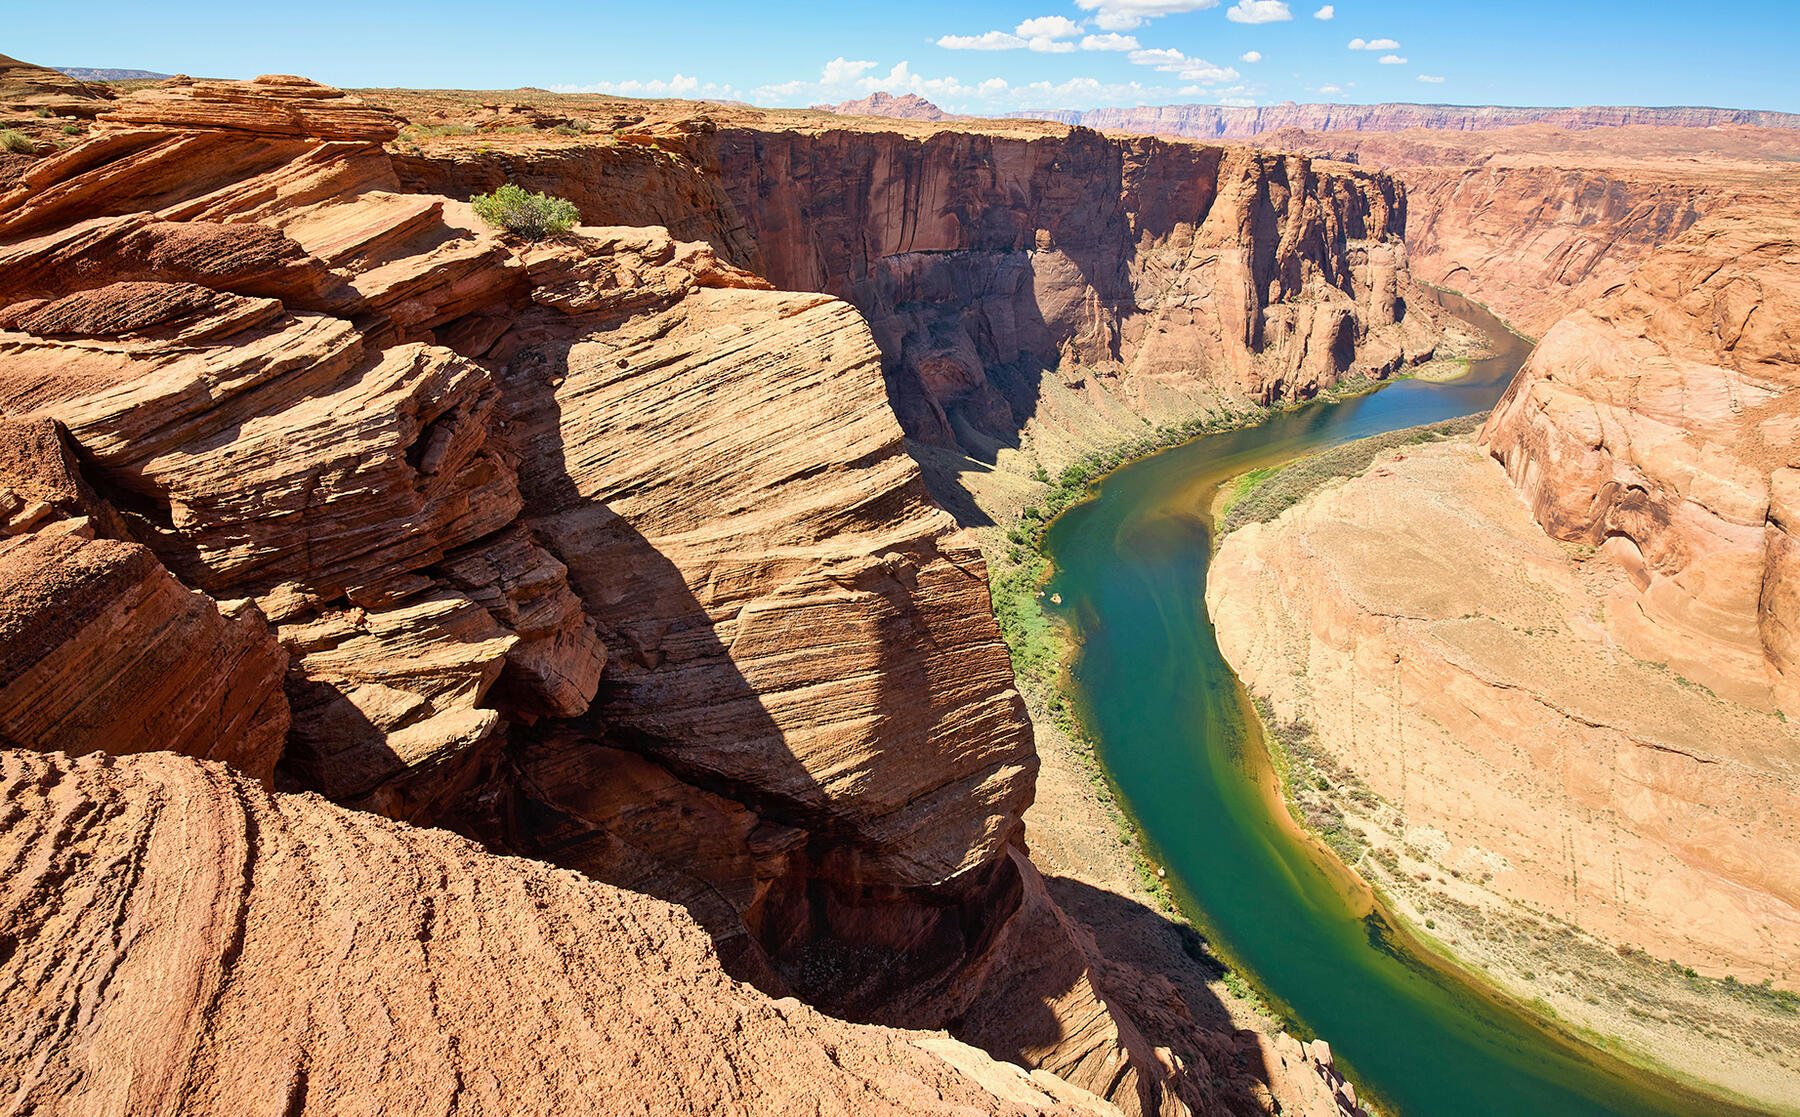 A blue-green ribbon of river flows through the peach and rust colored high canyon walls surrounding it.